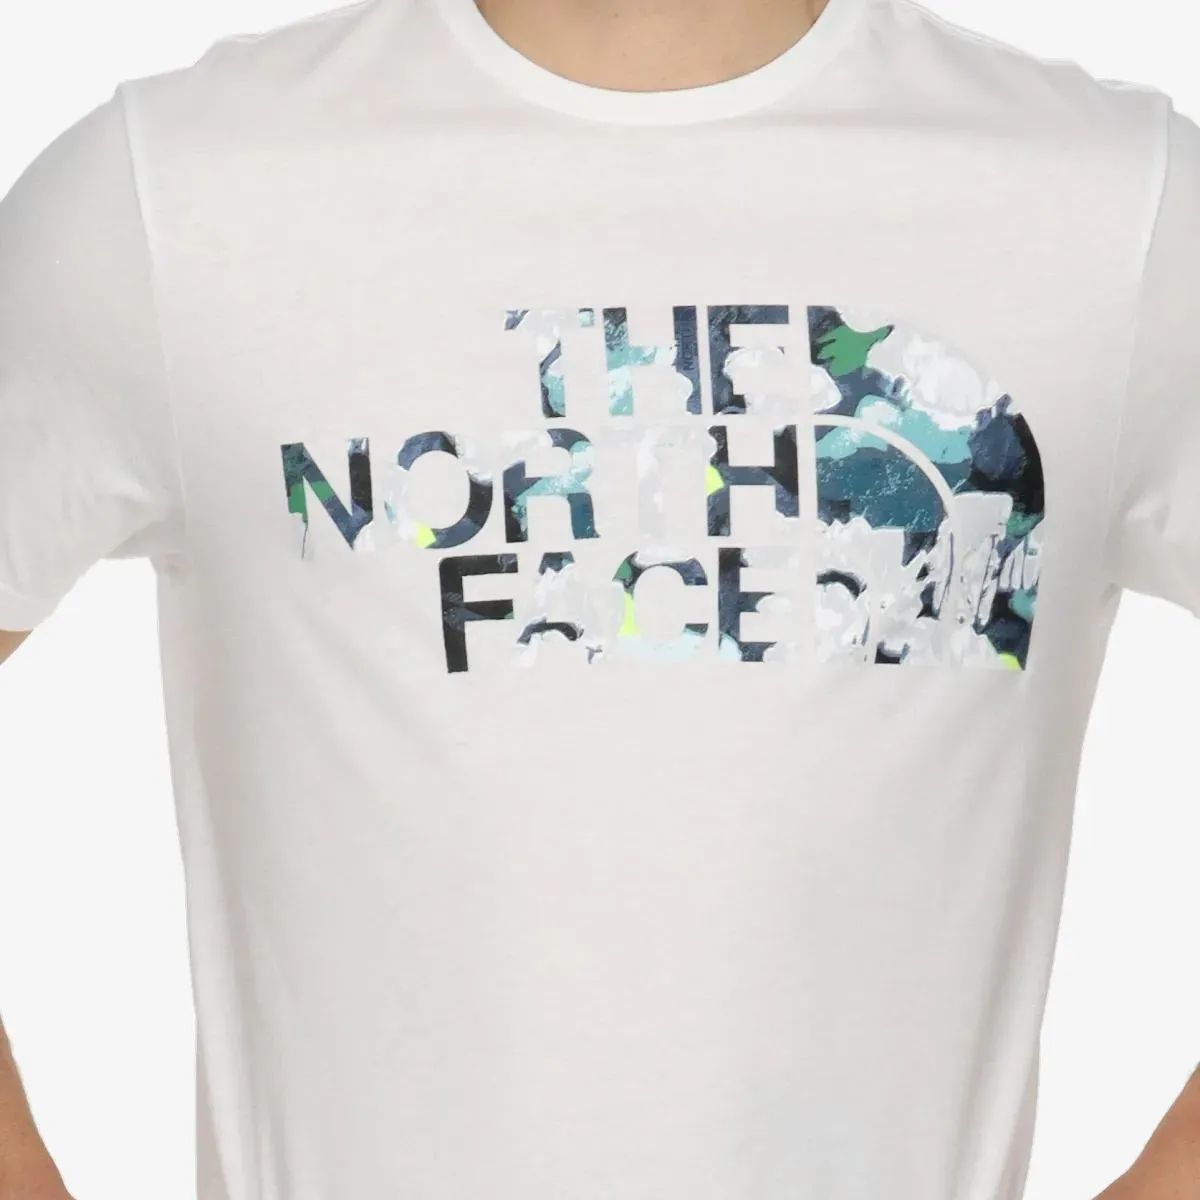 The North Face T-shirt Standard 